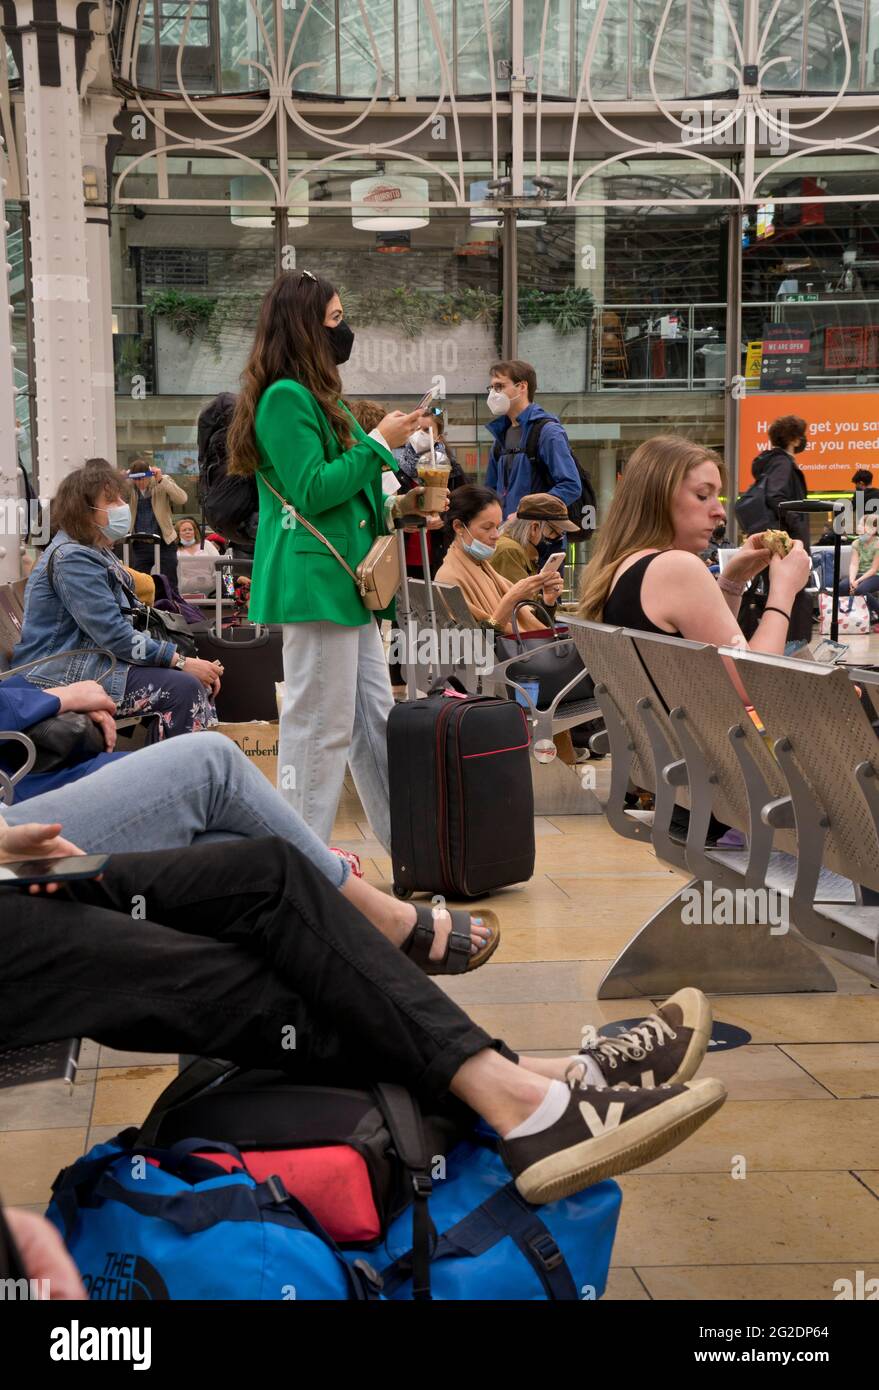 Passengers and staff at Paddington train station in London wearing masks and keeping social distance due to COVID-19 pandemic. England, UK. Stock Photo